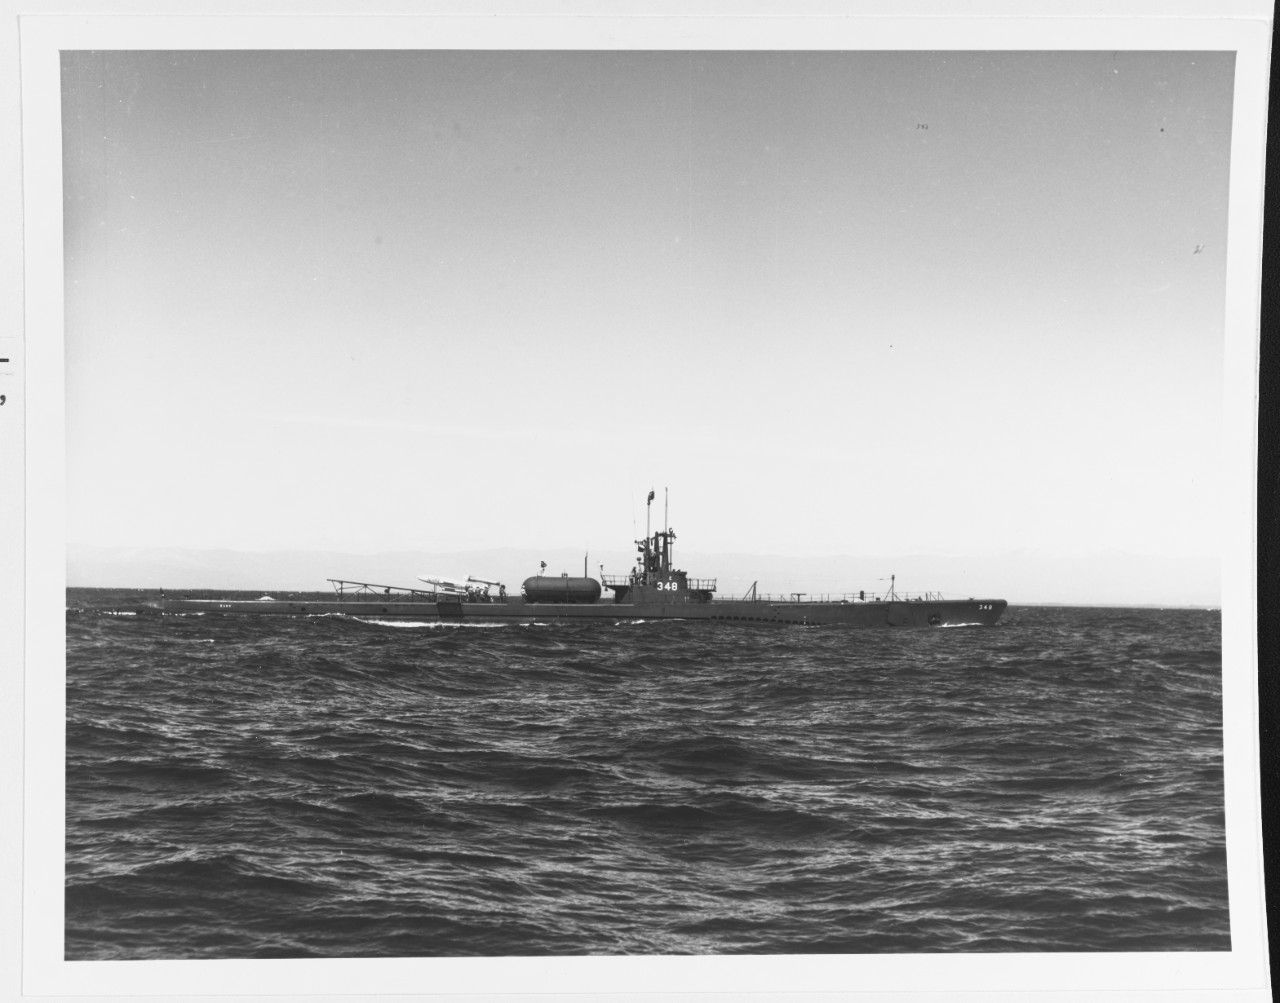 USS Cusk (SSG-348) with an LTV-N-2 Derby Loon Missile on deck while operating off Point Mugu, California, 22 March 1950.